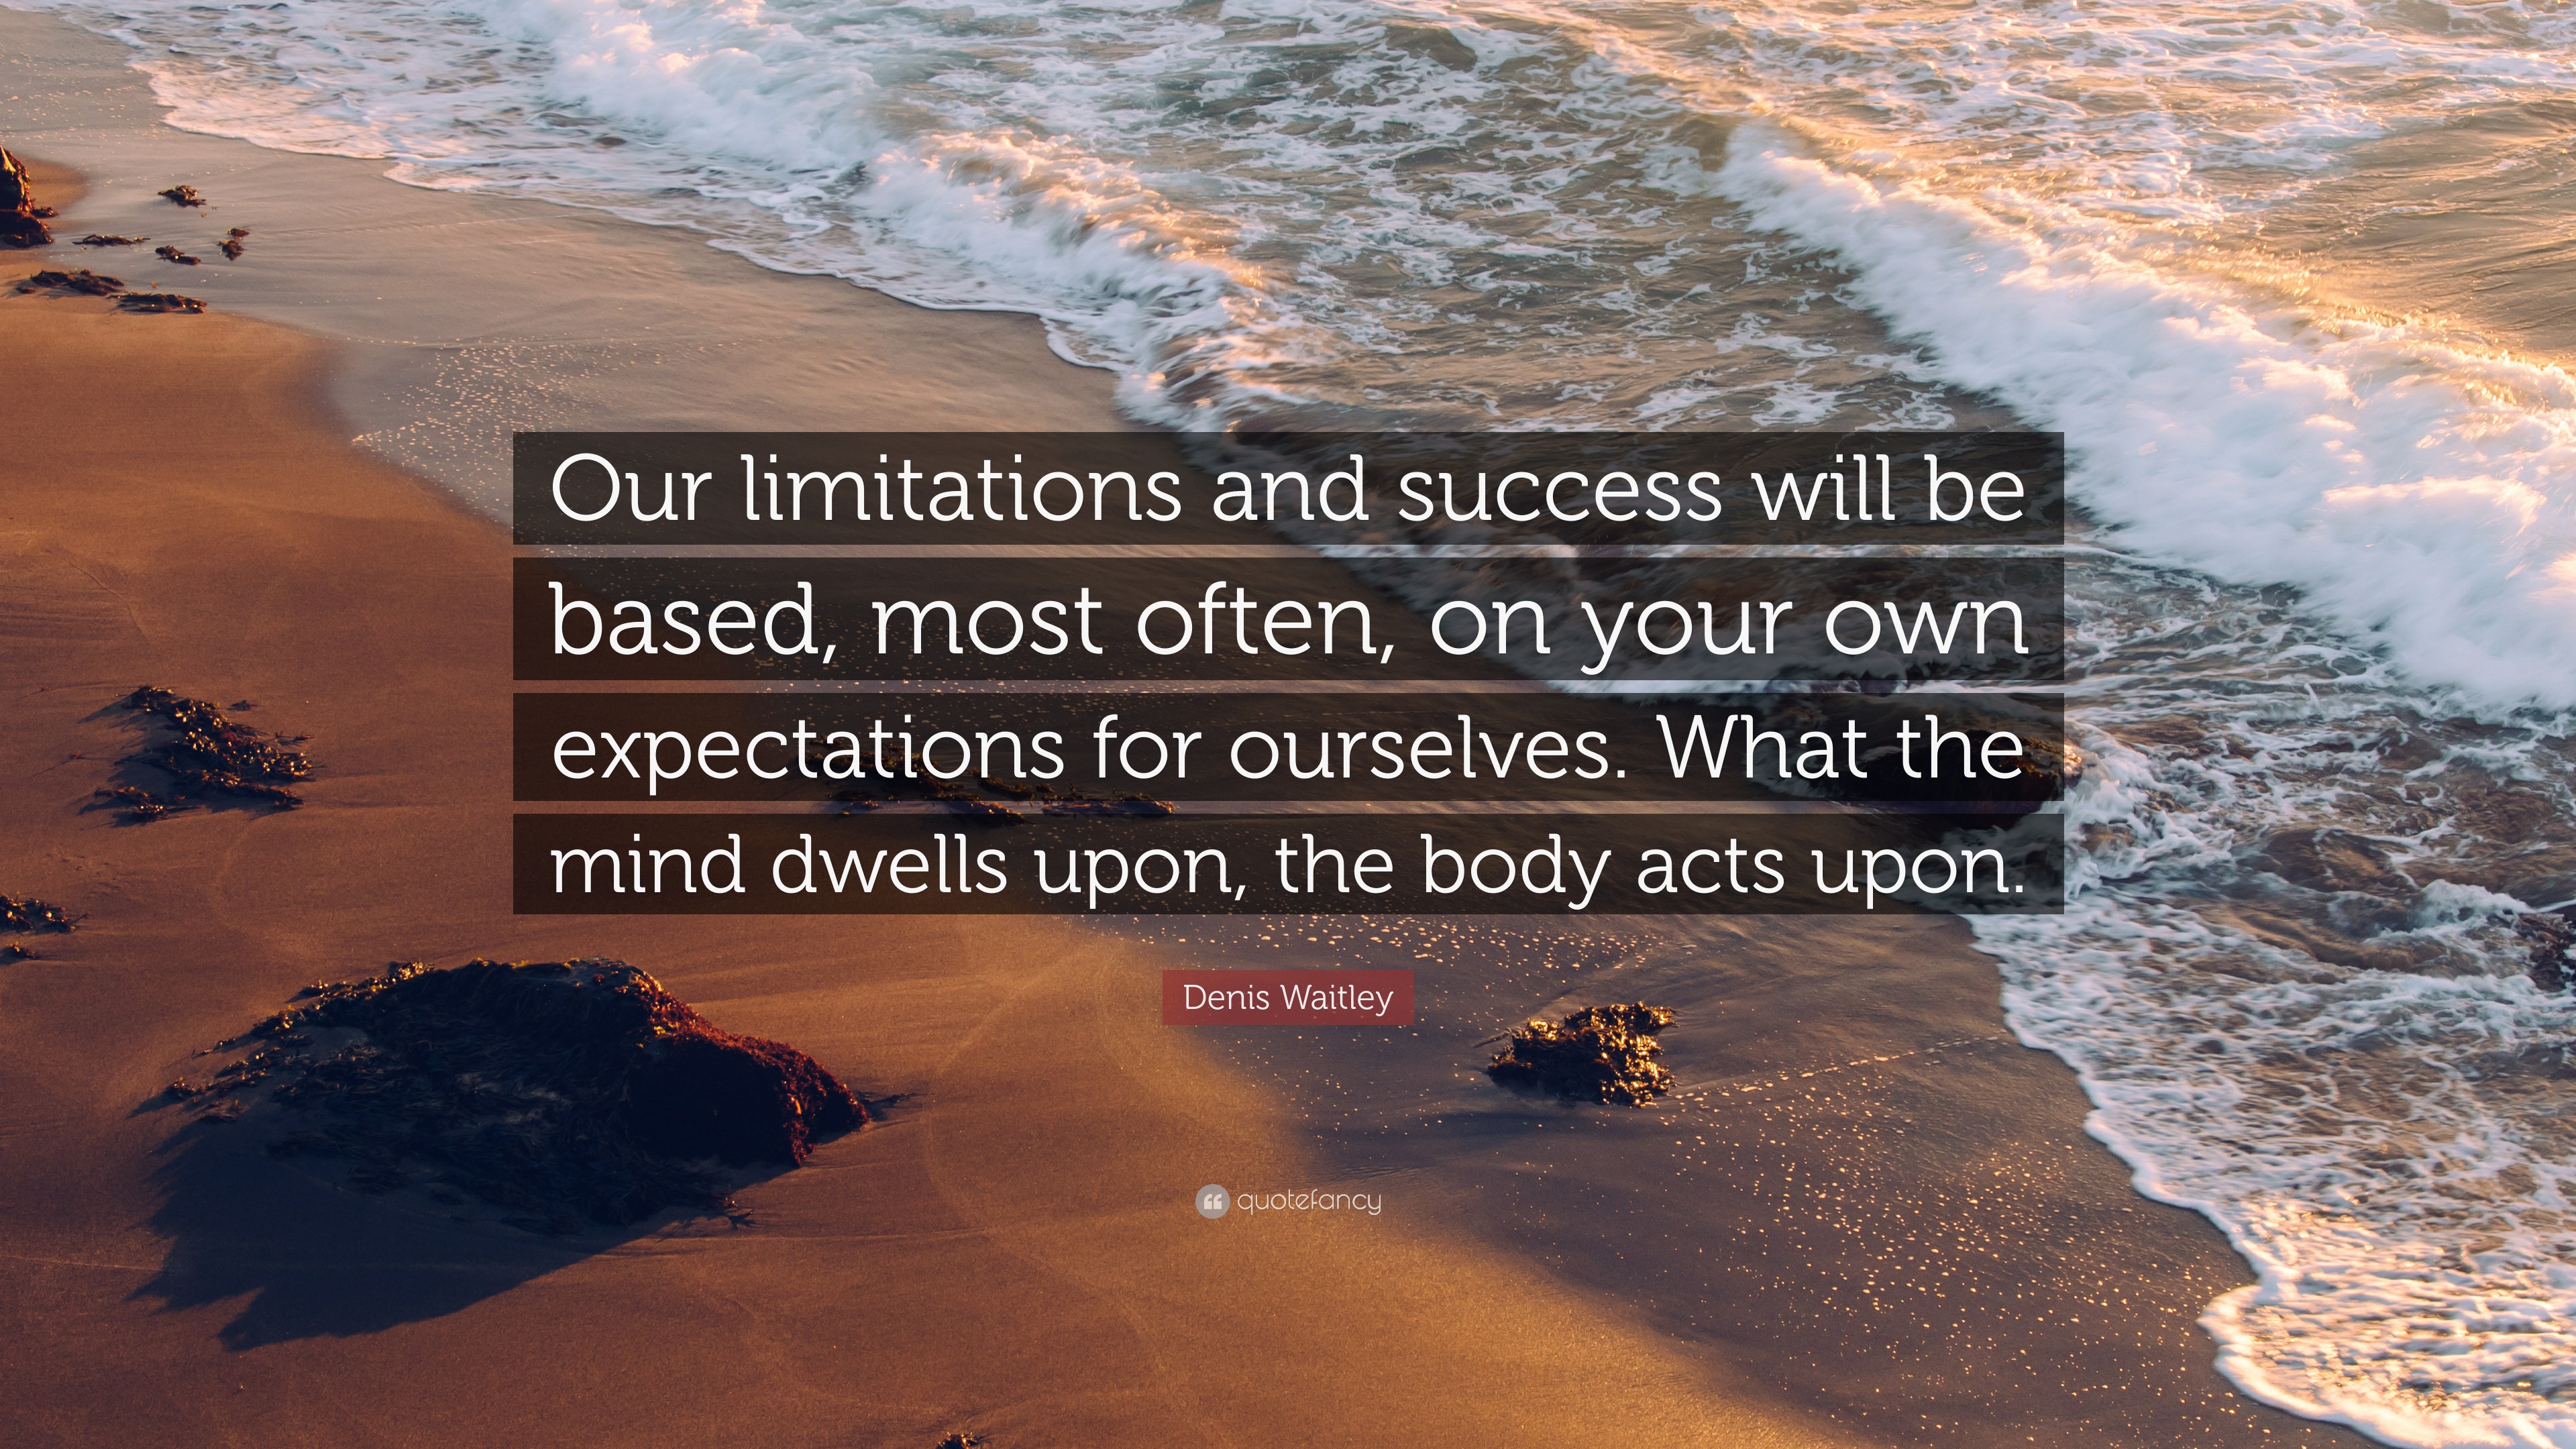 Denis Waitley Quote: “Our limitations and success will be based, most ...